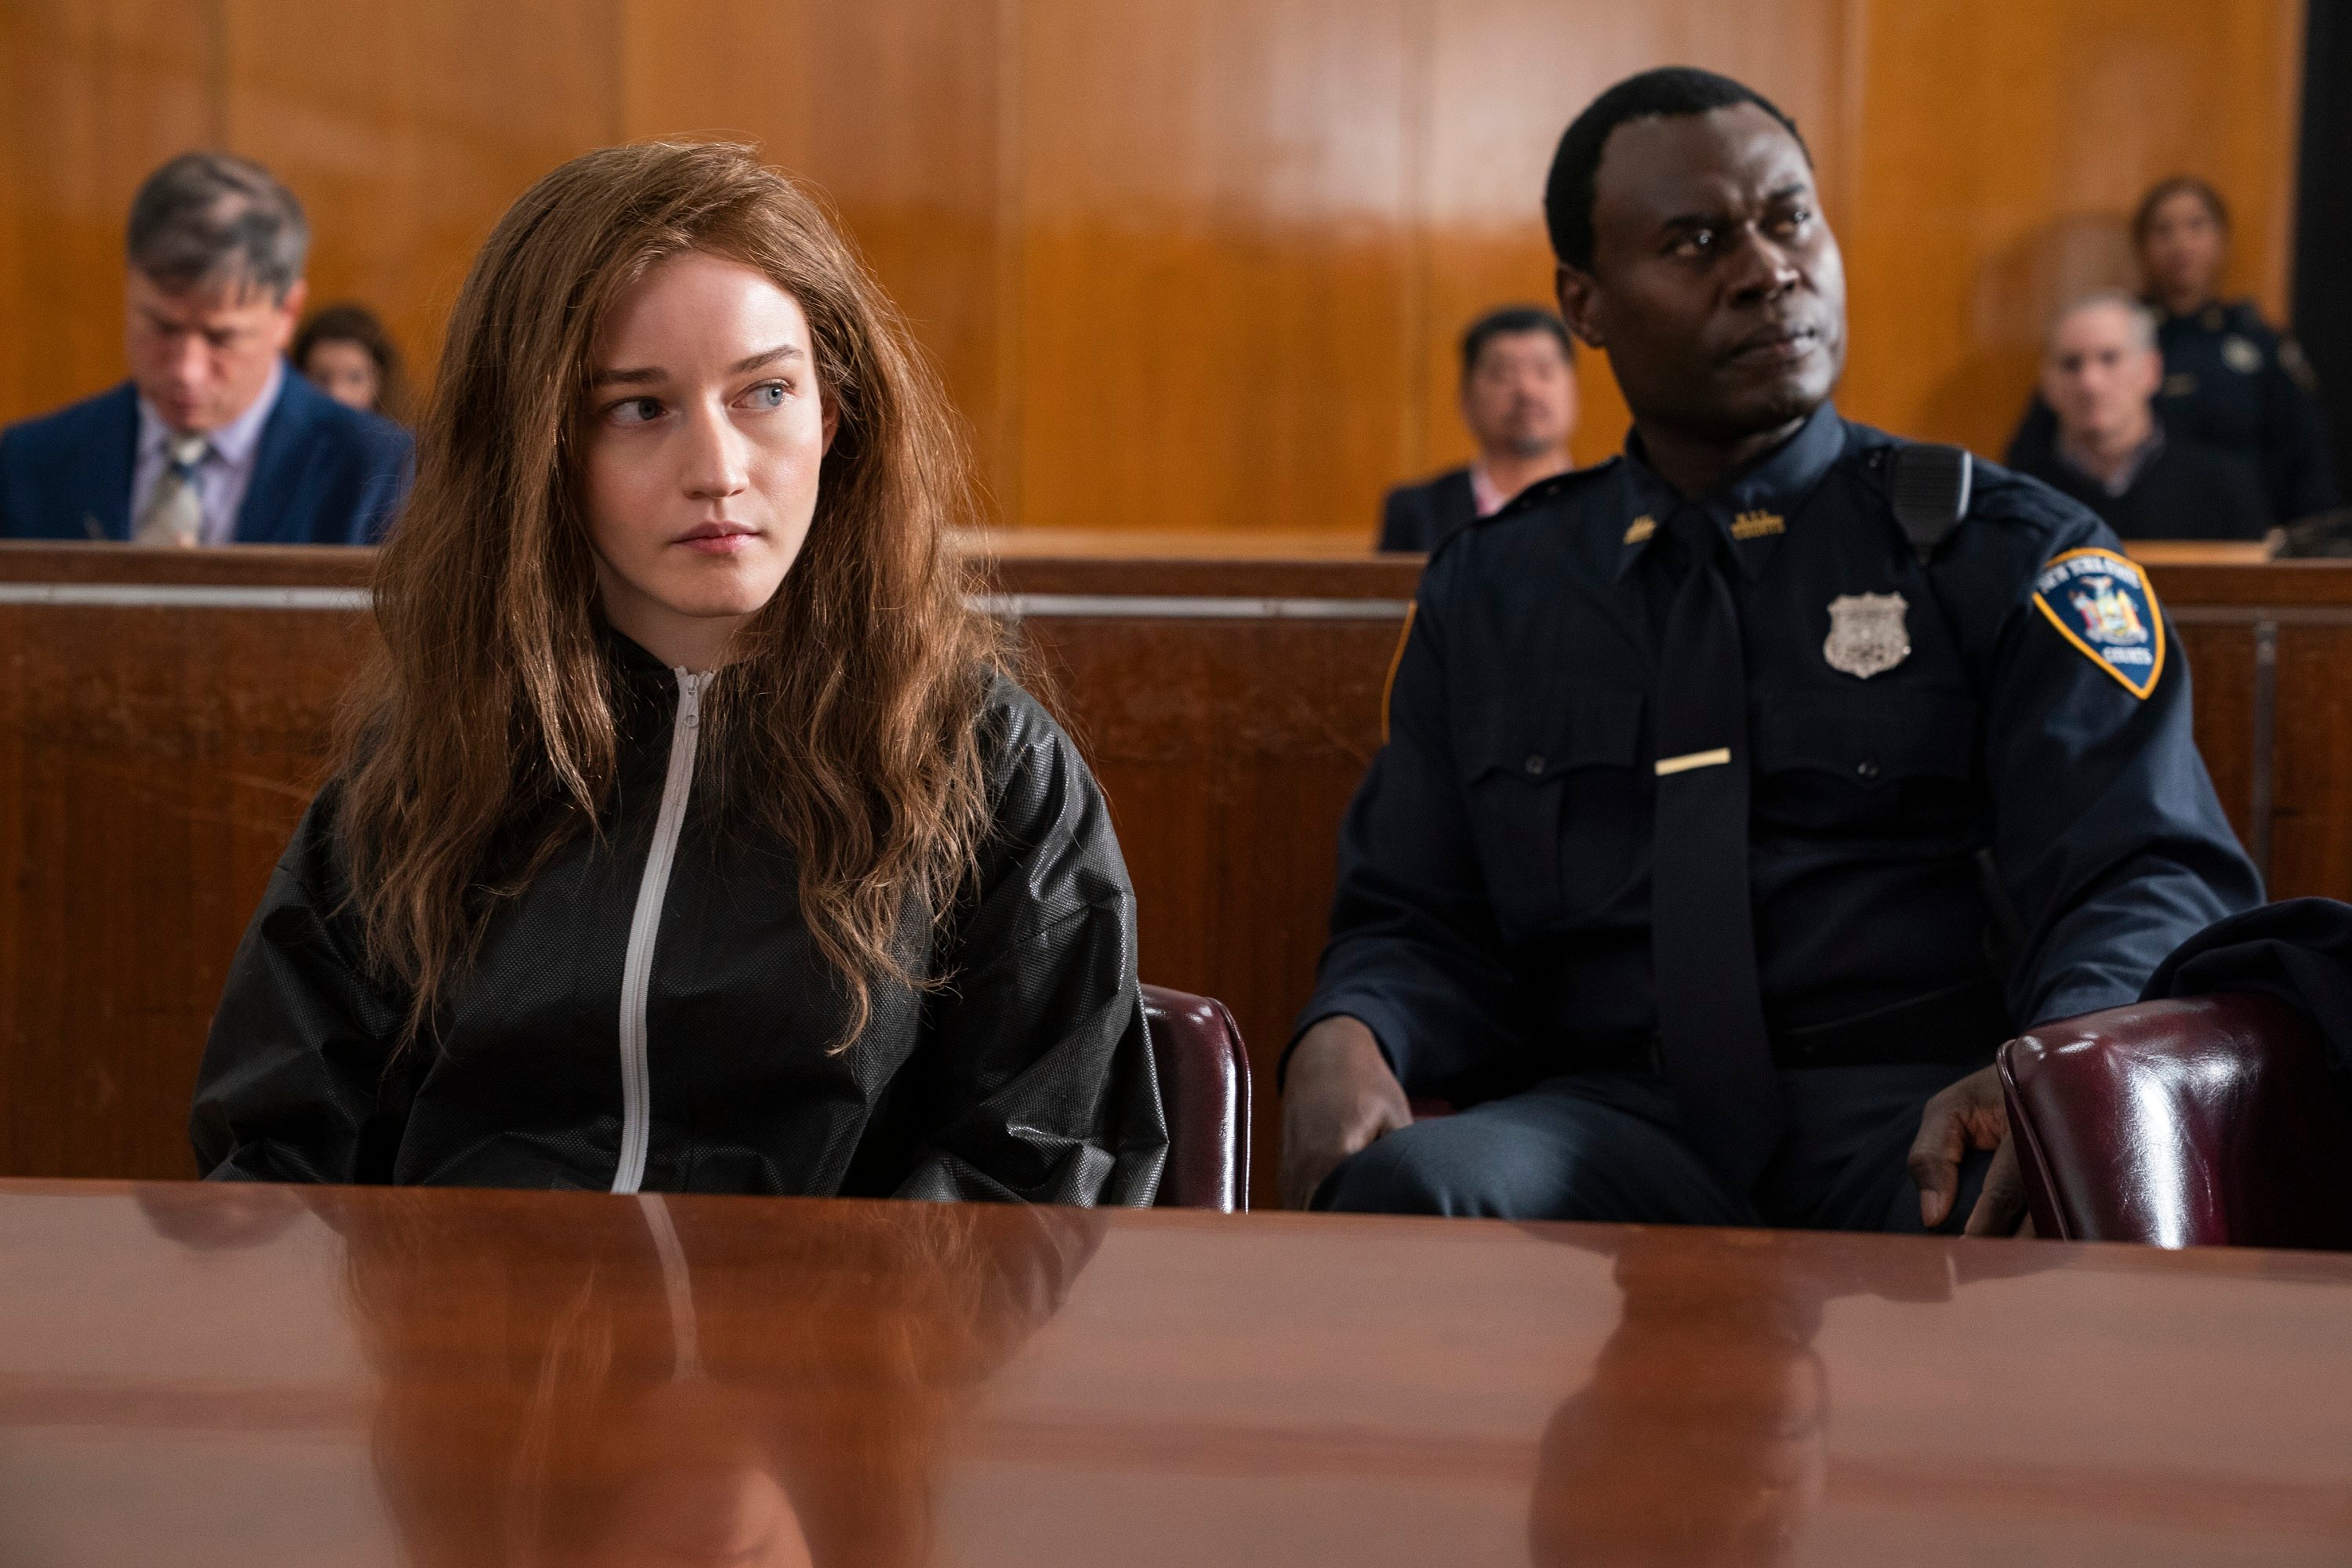 'Inventing Anna' Julia Garner portrays Anna Delvey in her court fashion clothing with an officer behind her